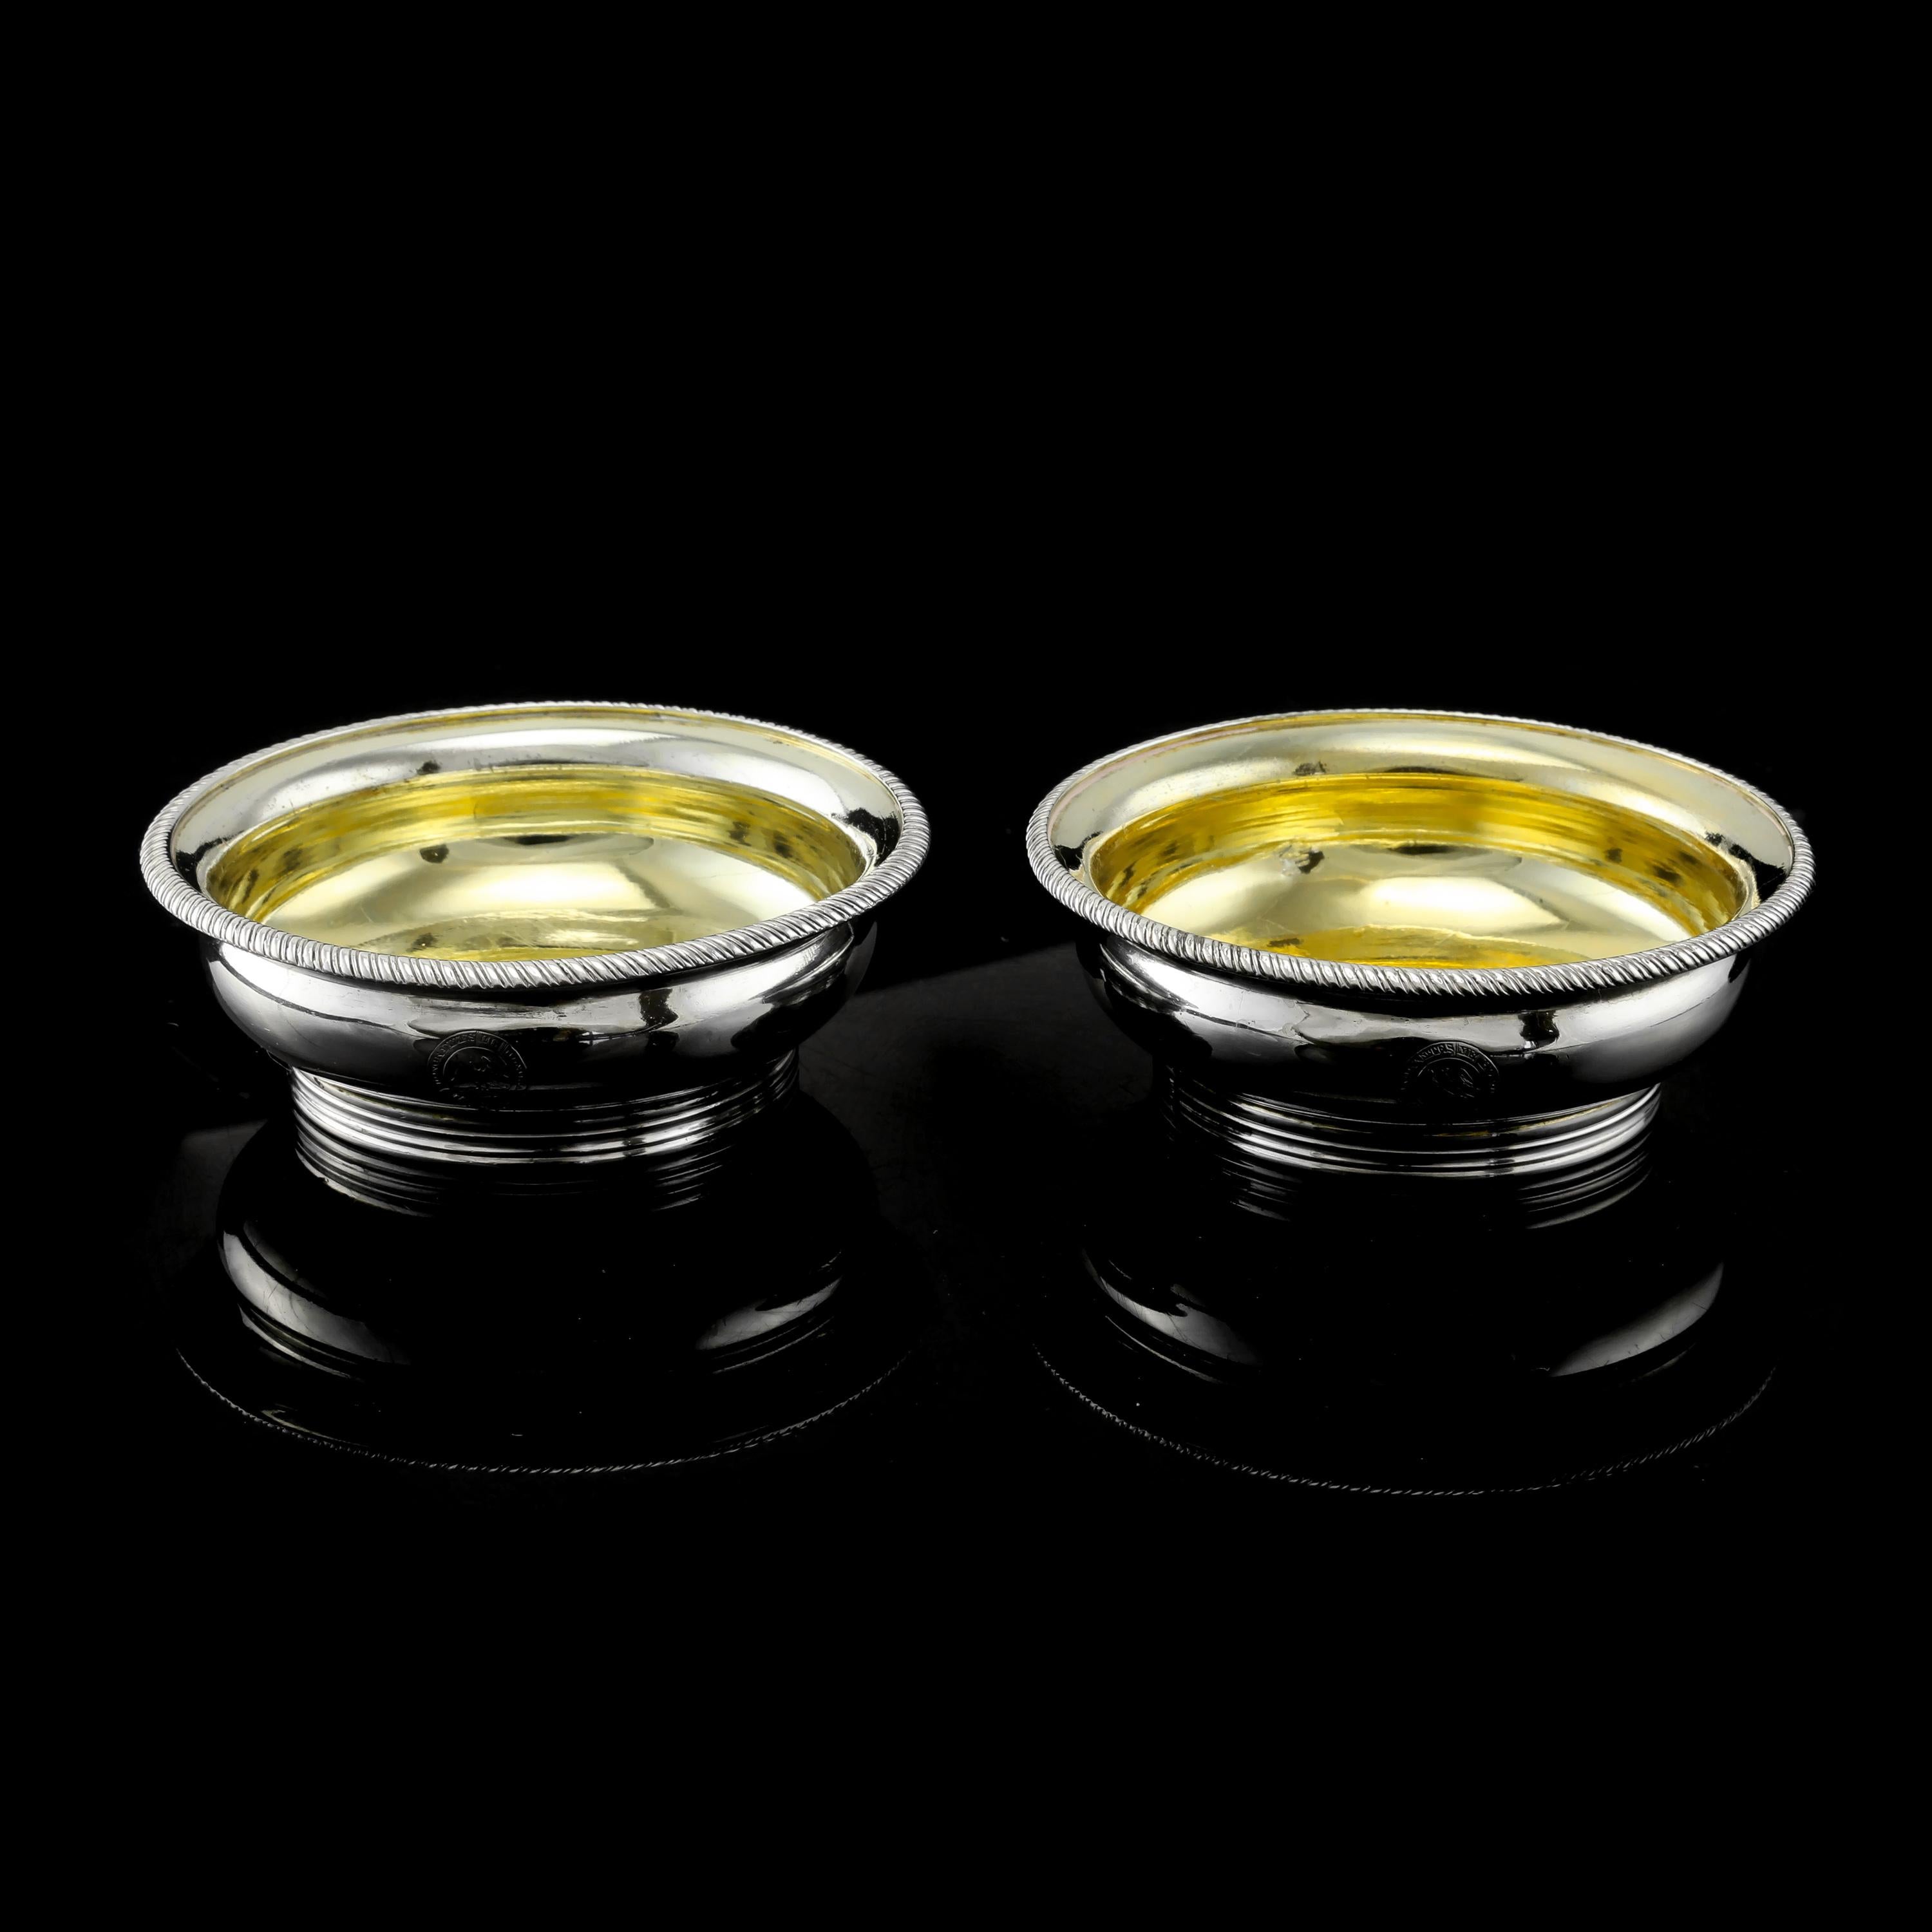 We are delighted to offer this quality pair of Georgian solid silver salt cellars made by Joseph Felix Podio in London, 1809. 
 
The pair features a plain exterior finish with a mirror-like surface, with one hand-engraved family crest and motto on